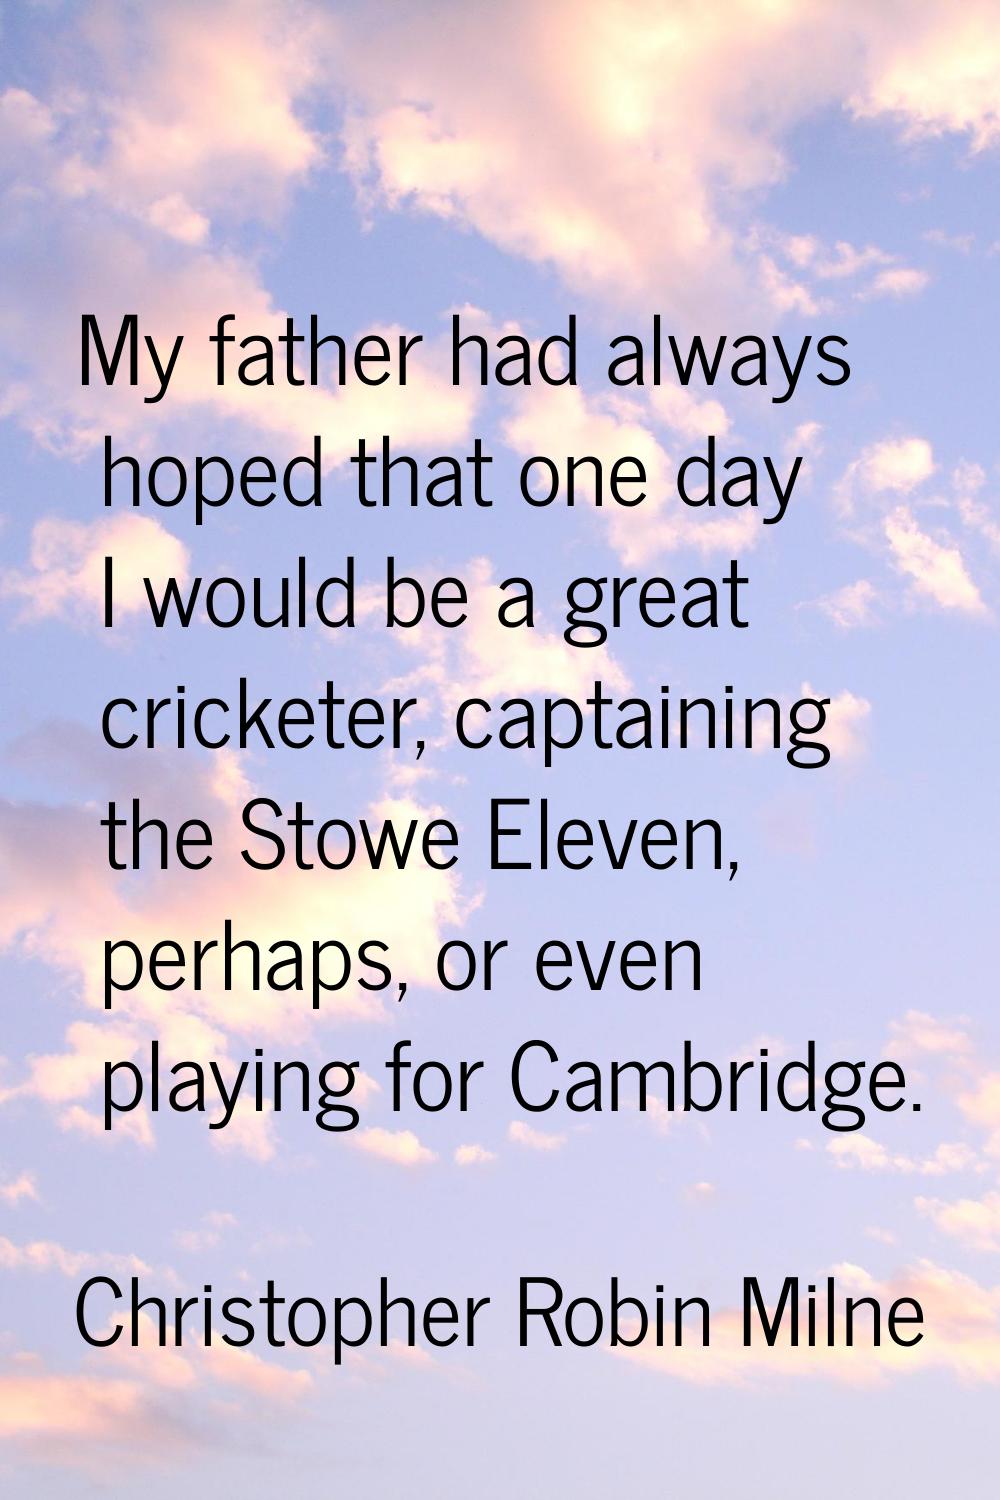 My father had always hoped that one day I would be a great cricketer, captaining the Stowe Eleven, 